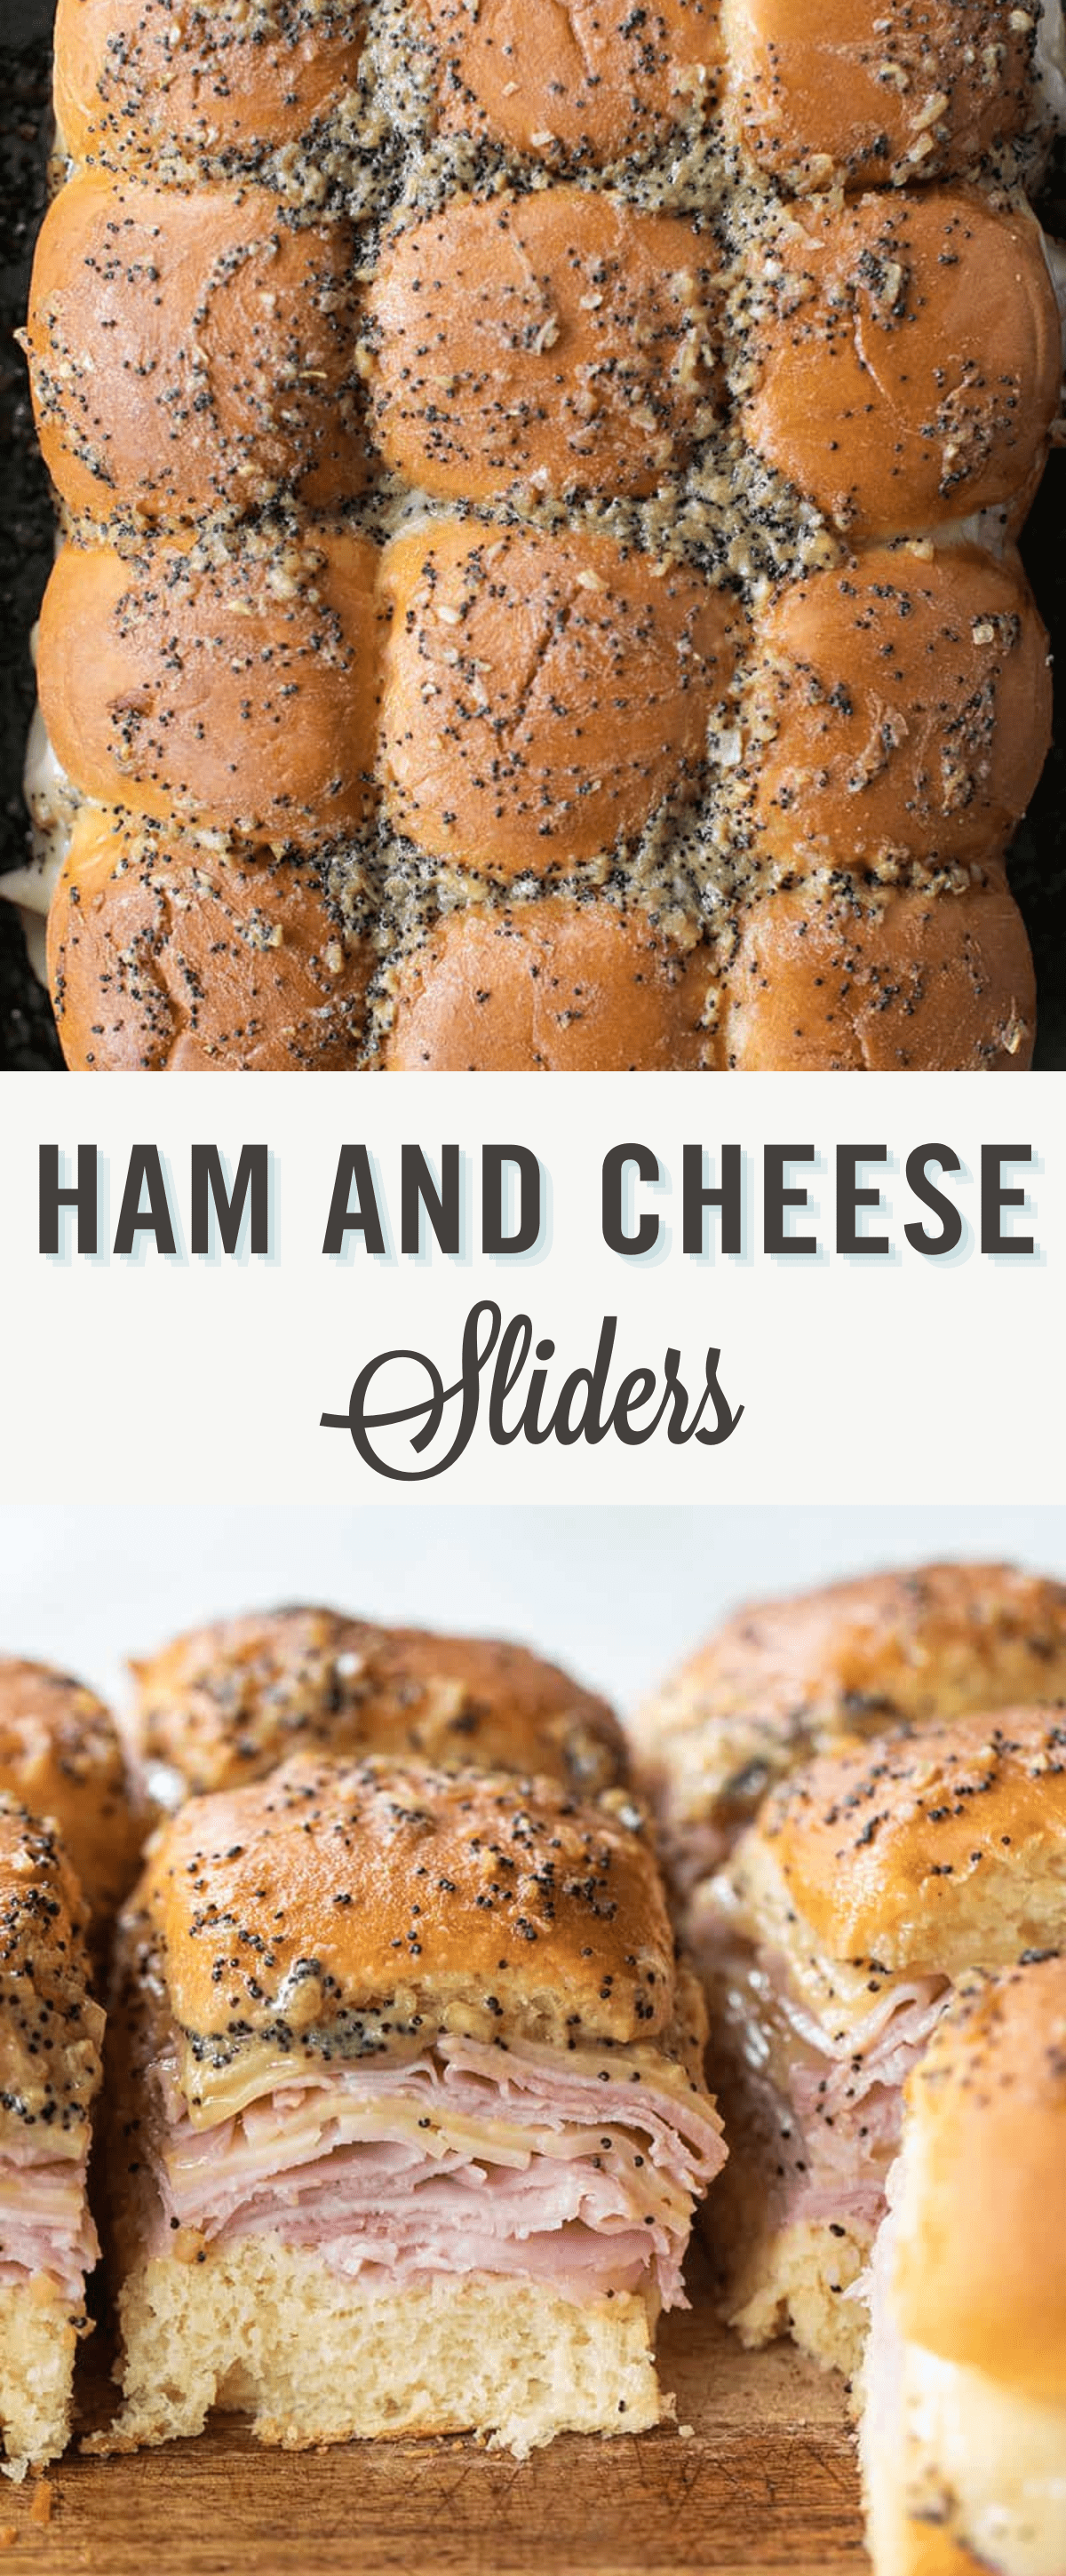 Ham and cheese sliders with text.